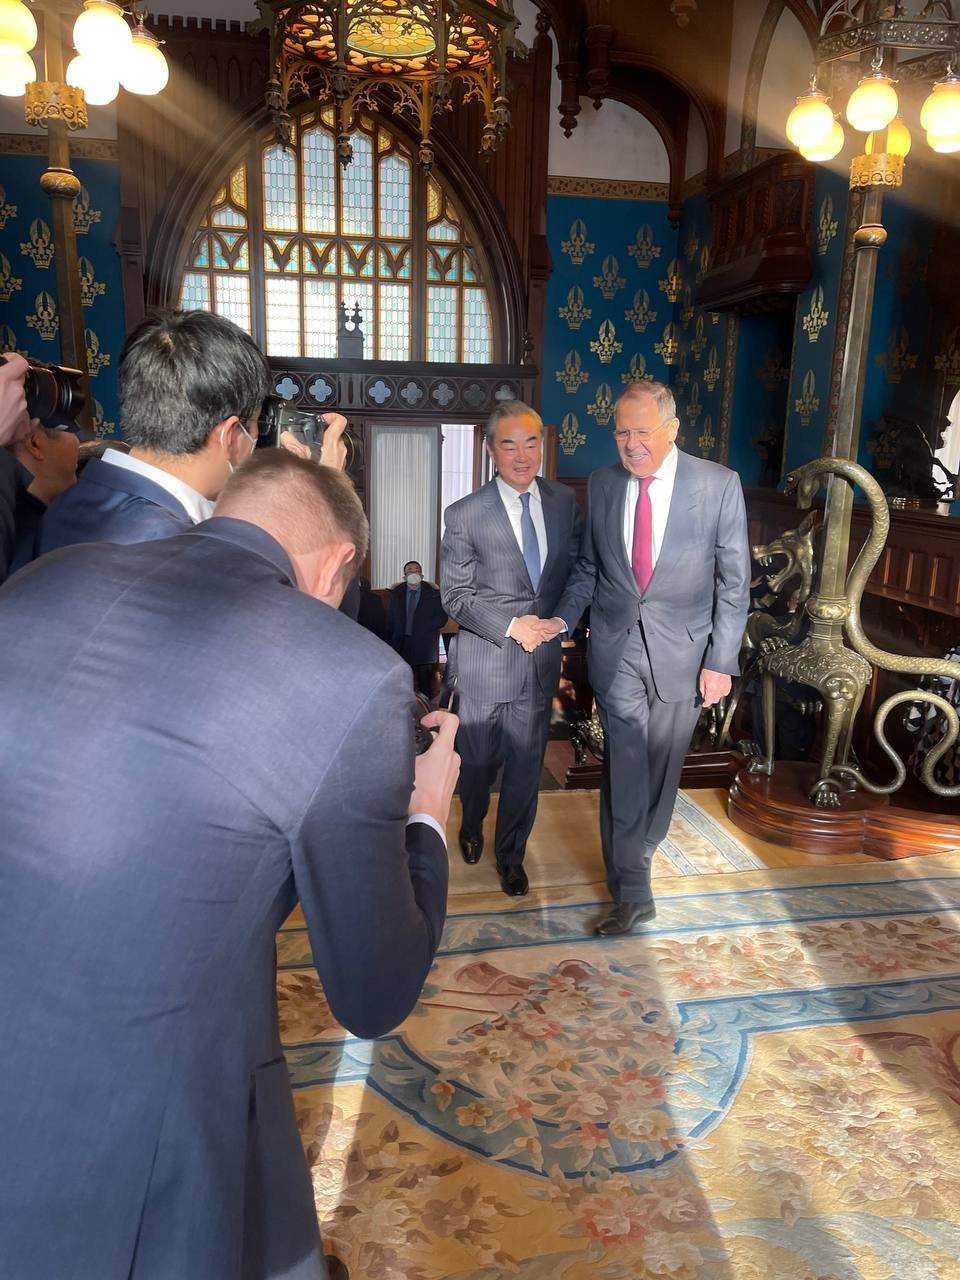 <i>Russian Foreign Ministry Maria Zakharova/Telegram</i><br/>Russian Foreign Minister Sergey Lavrov and his Chinese counterpart shake hands during a meeting in Moscow on Wednesday.